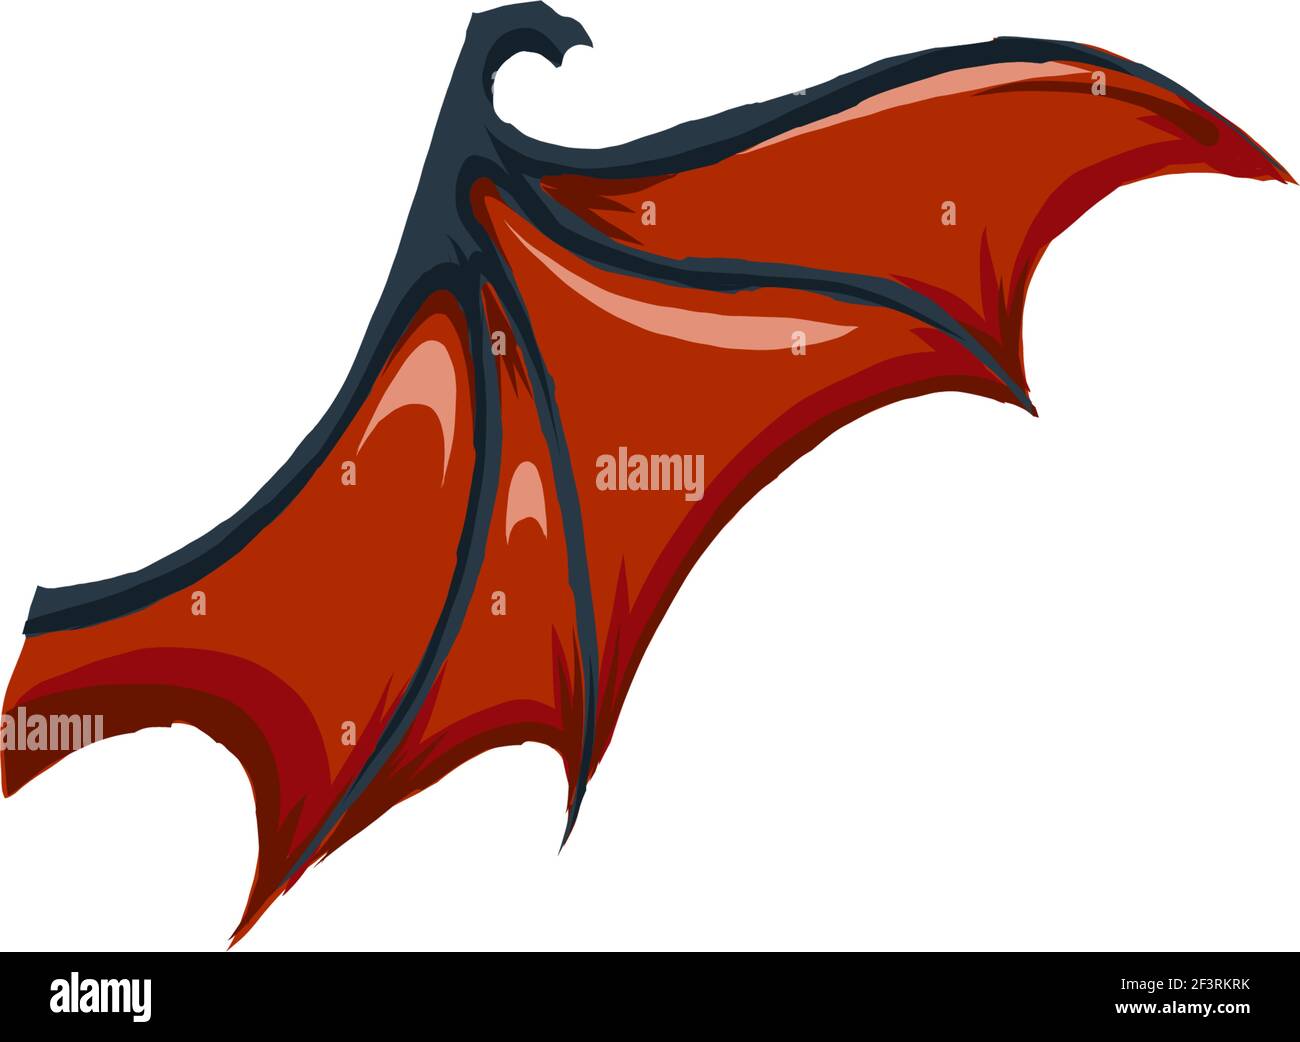 illustration pumpkin face with red bat wings Stock Vector